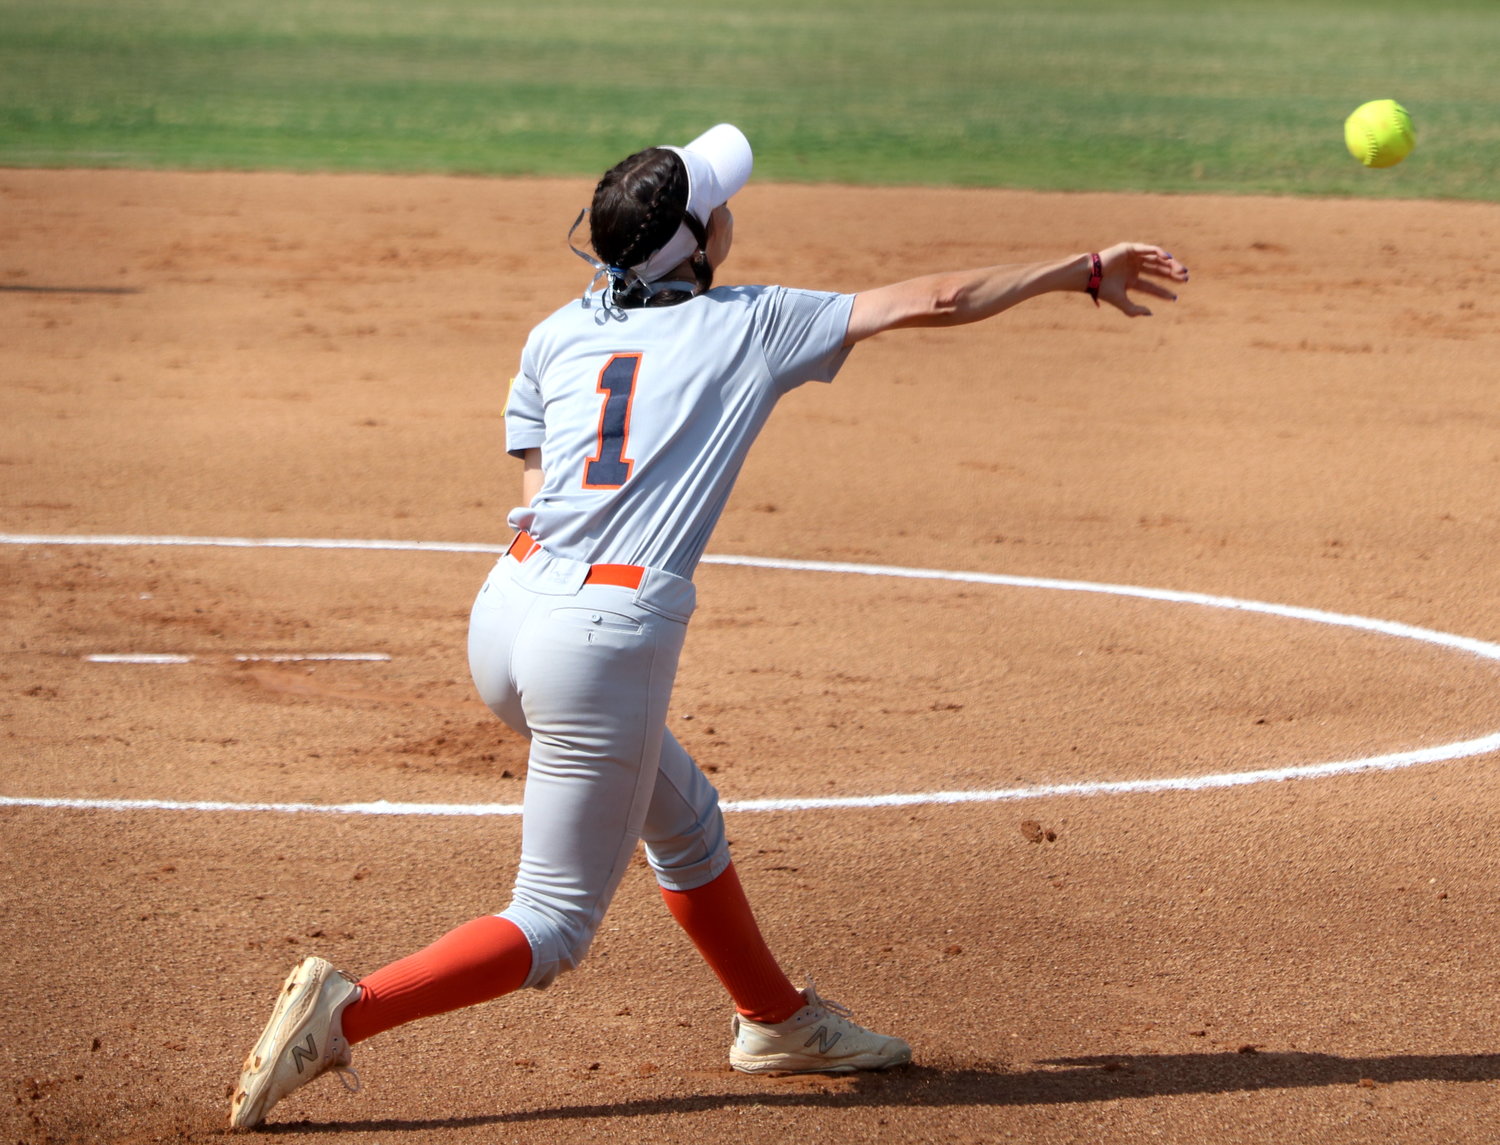 Kamryn Wallman throws to first base during Saturday’s Class 6A Regional Quarterfinal game between Seven Lakes and George Ranch at the George Ranch softball field.